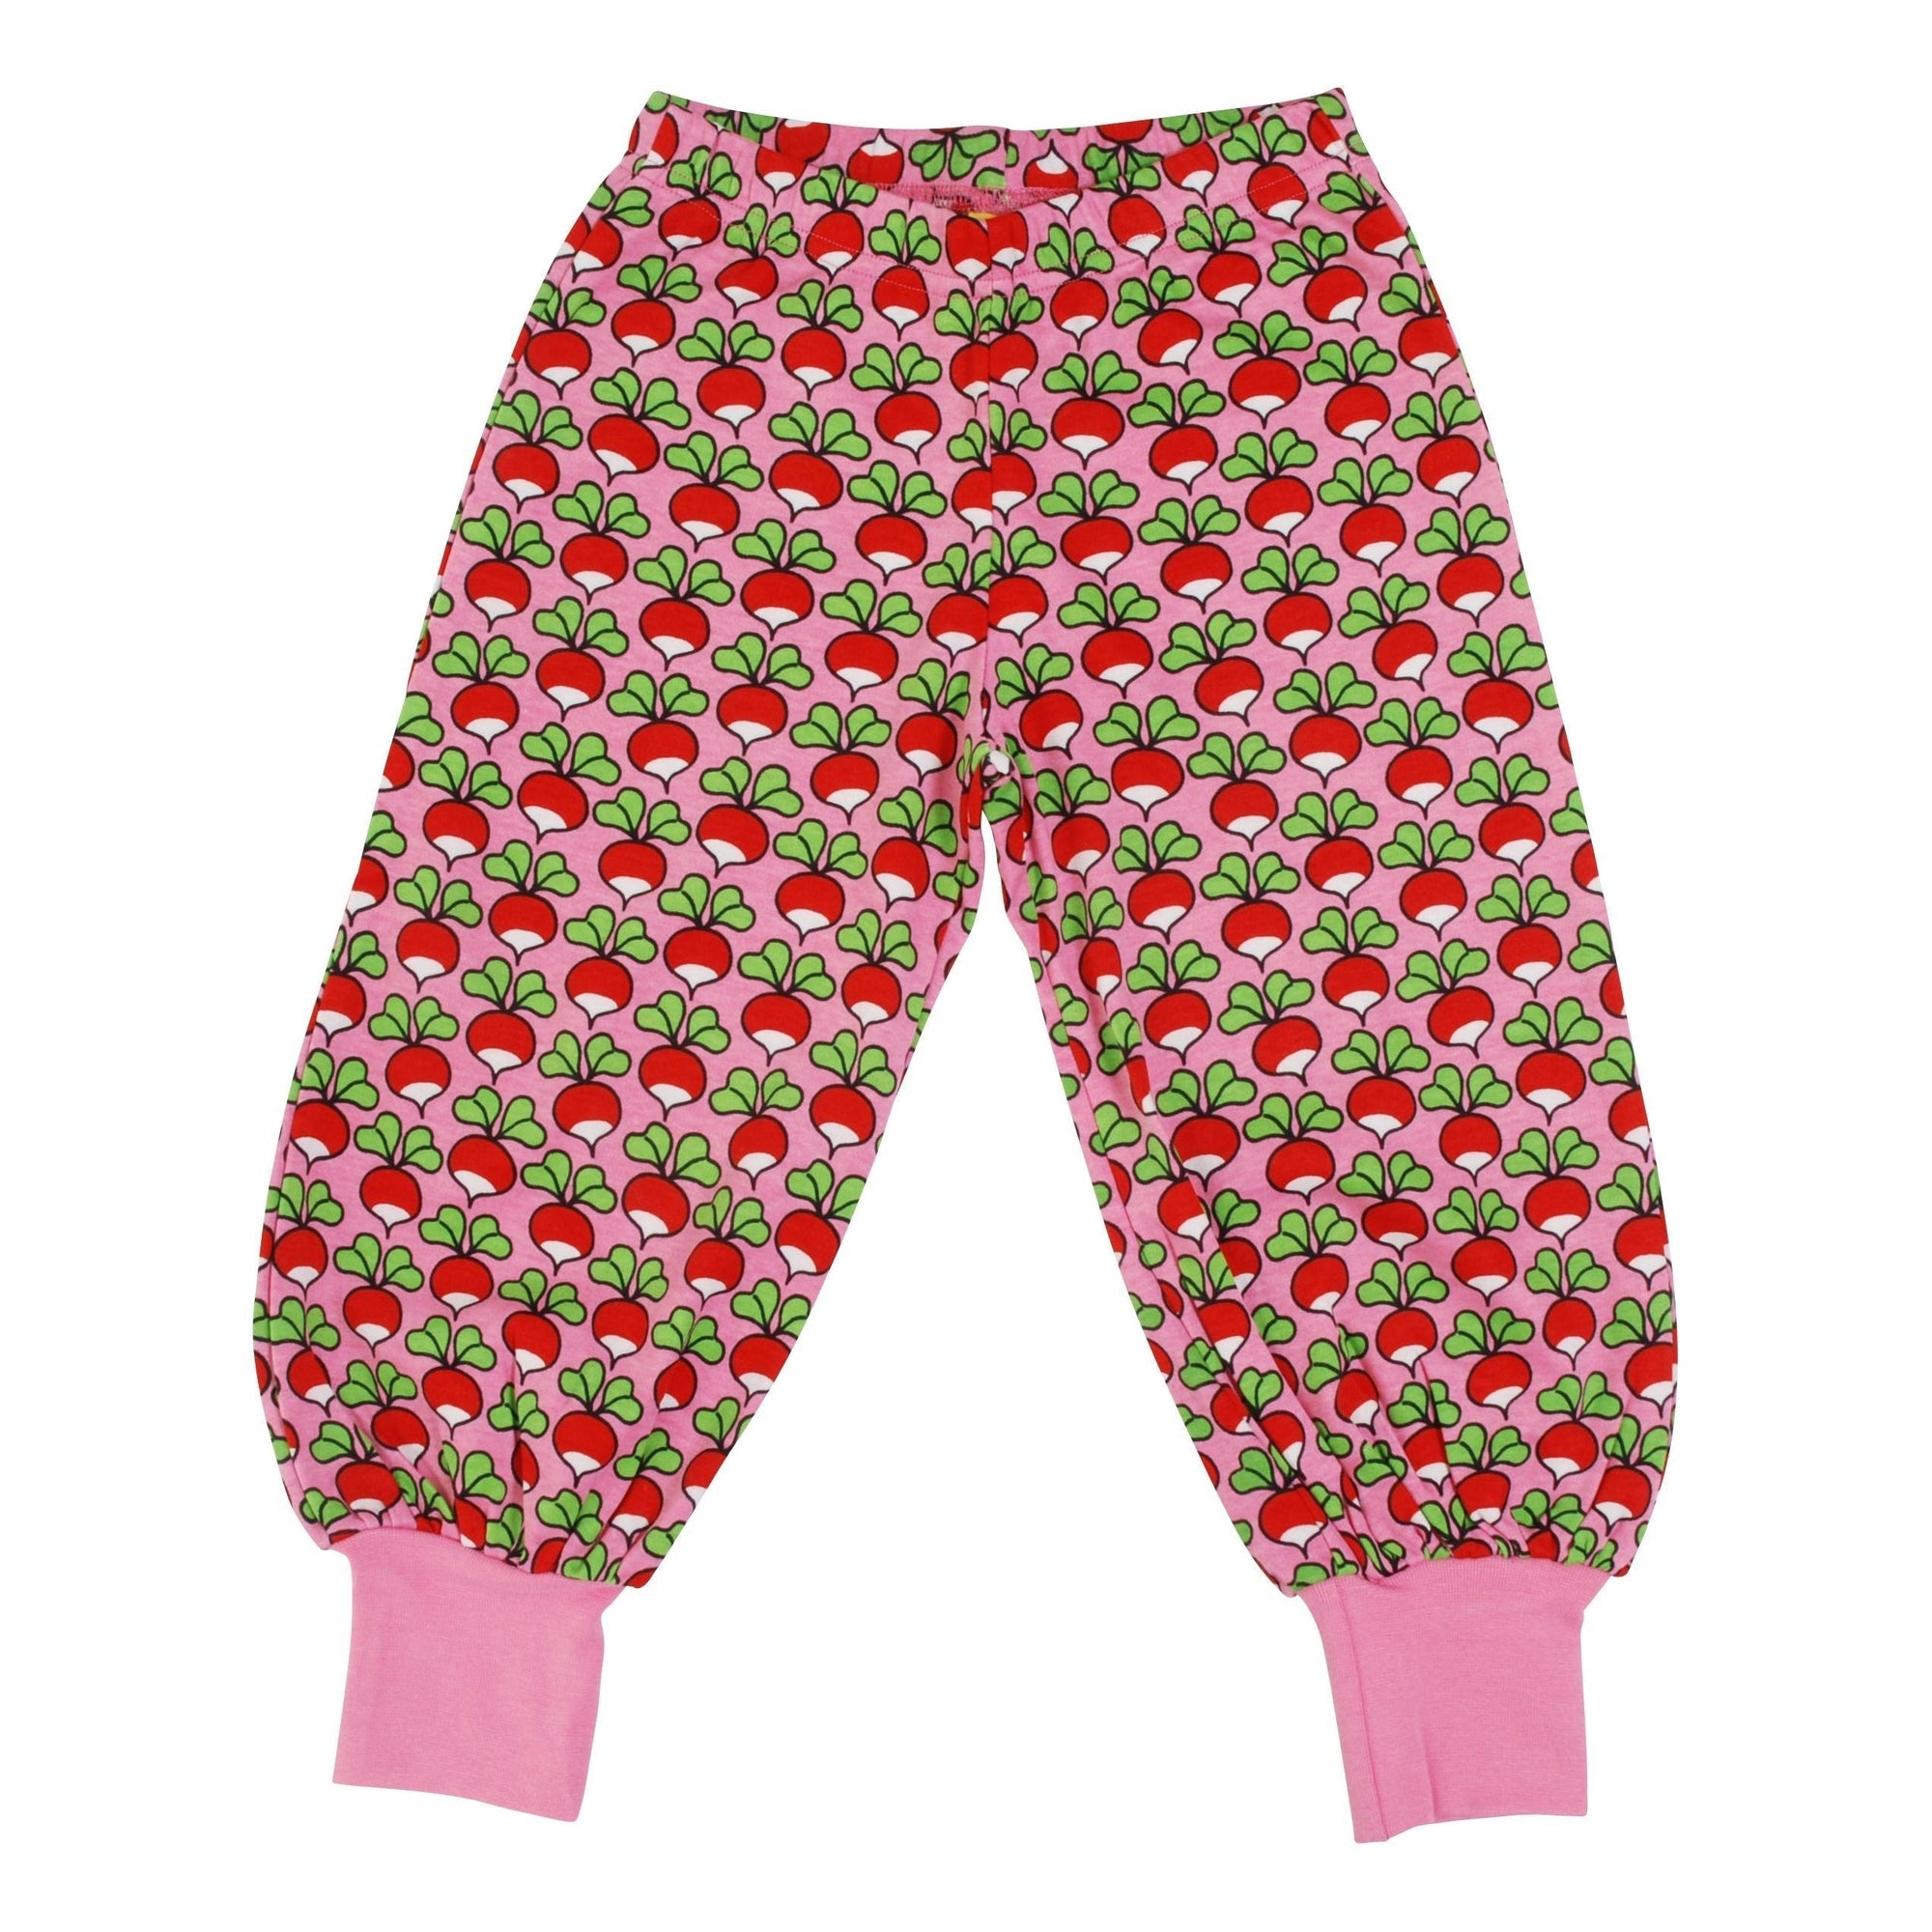 Radish - Pink Baggy Pants - 1 Left Size 10-12 years-Duns Sweden-Modern Rascals